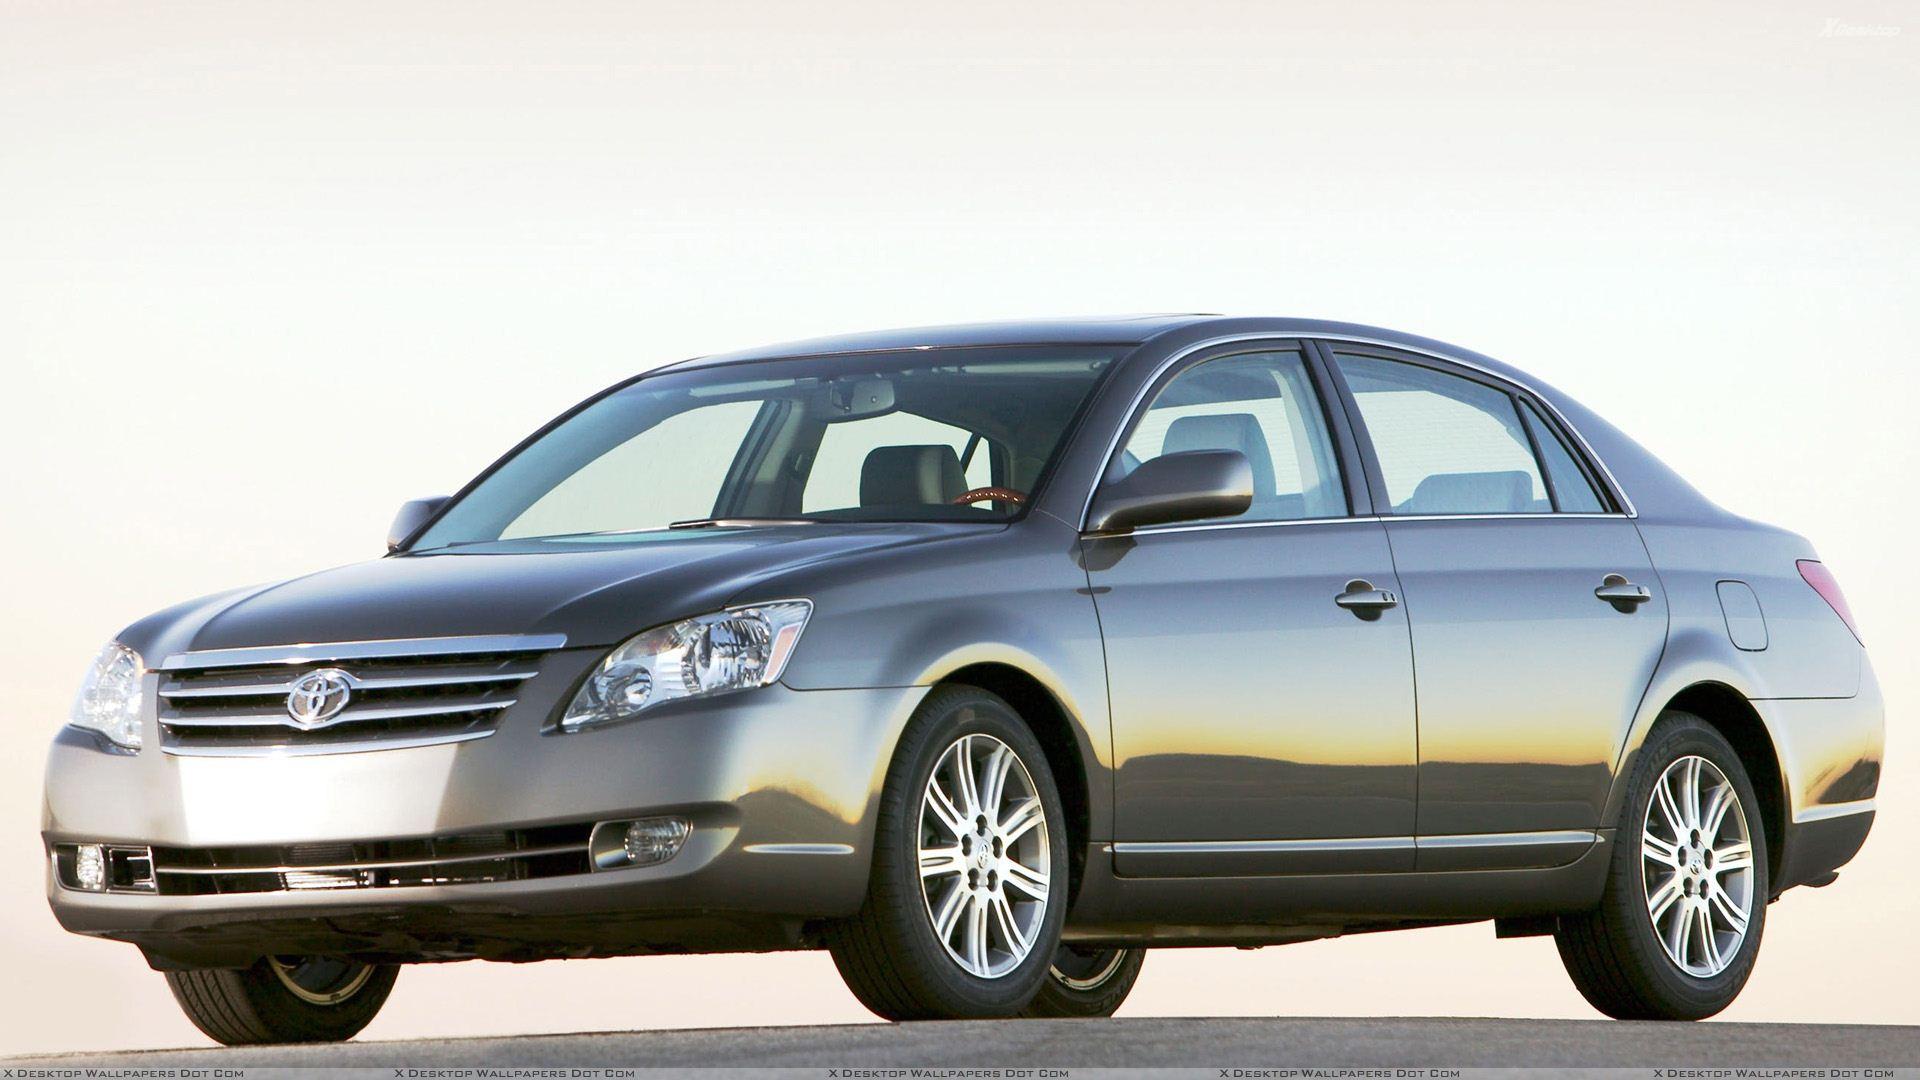 Toyota Avalon Wallpaper, Photo & Image in HD